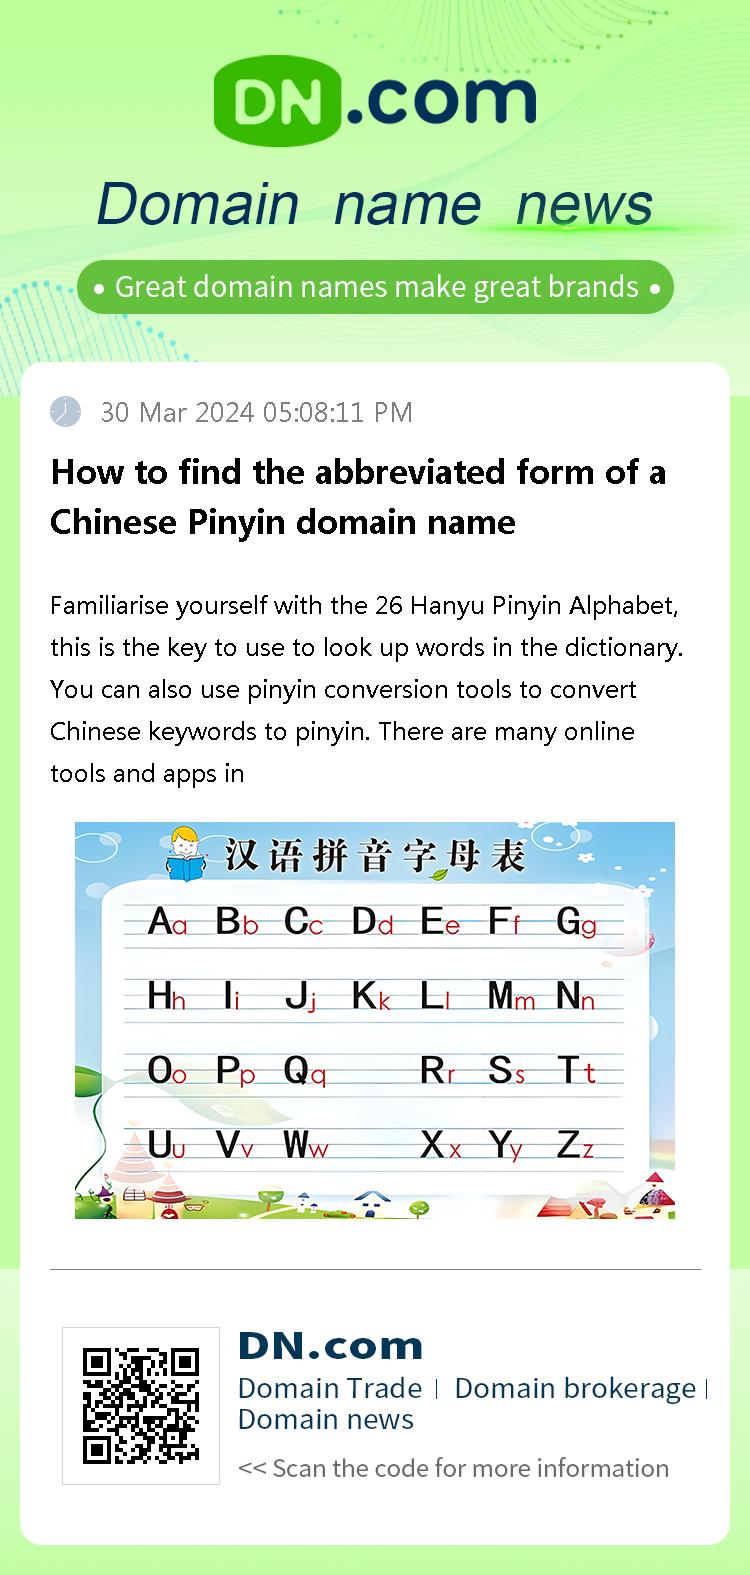 How to find the abbreviated form of a Chinese Pinyin domain name